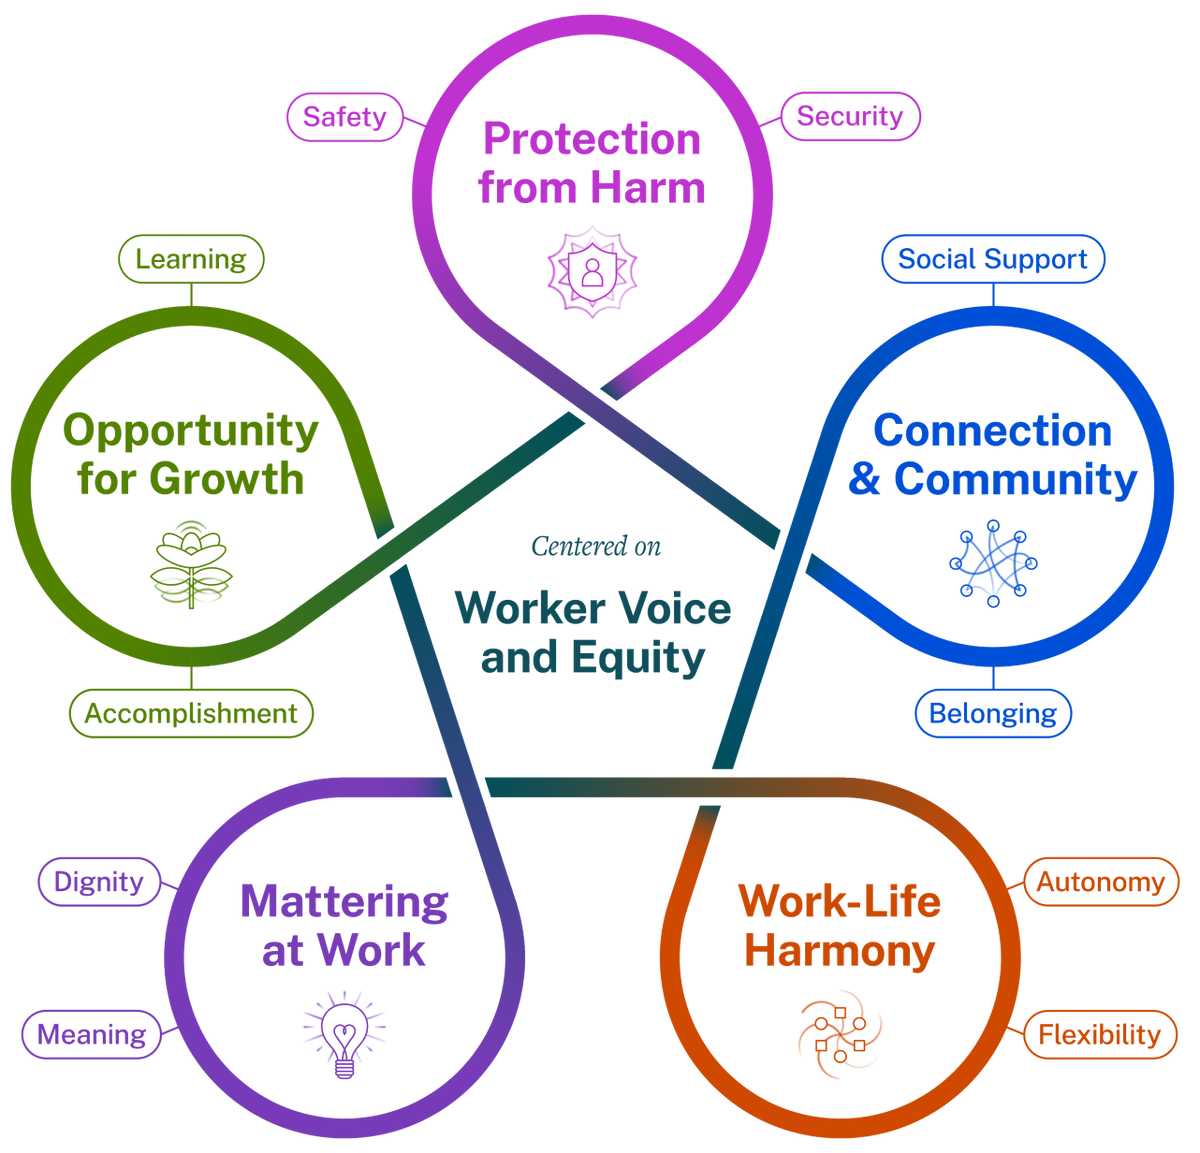 Illustration of five essentials—Protection from Harm, Connection and Community, Work-Life Harmony, Mattering at Work, Opportunity for Growth—in a circle with Worker Voice and Equity in the center